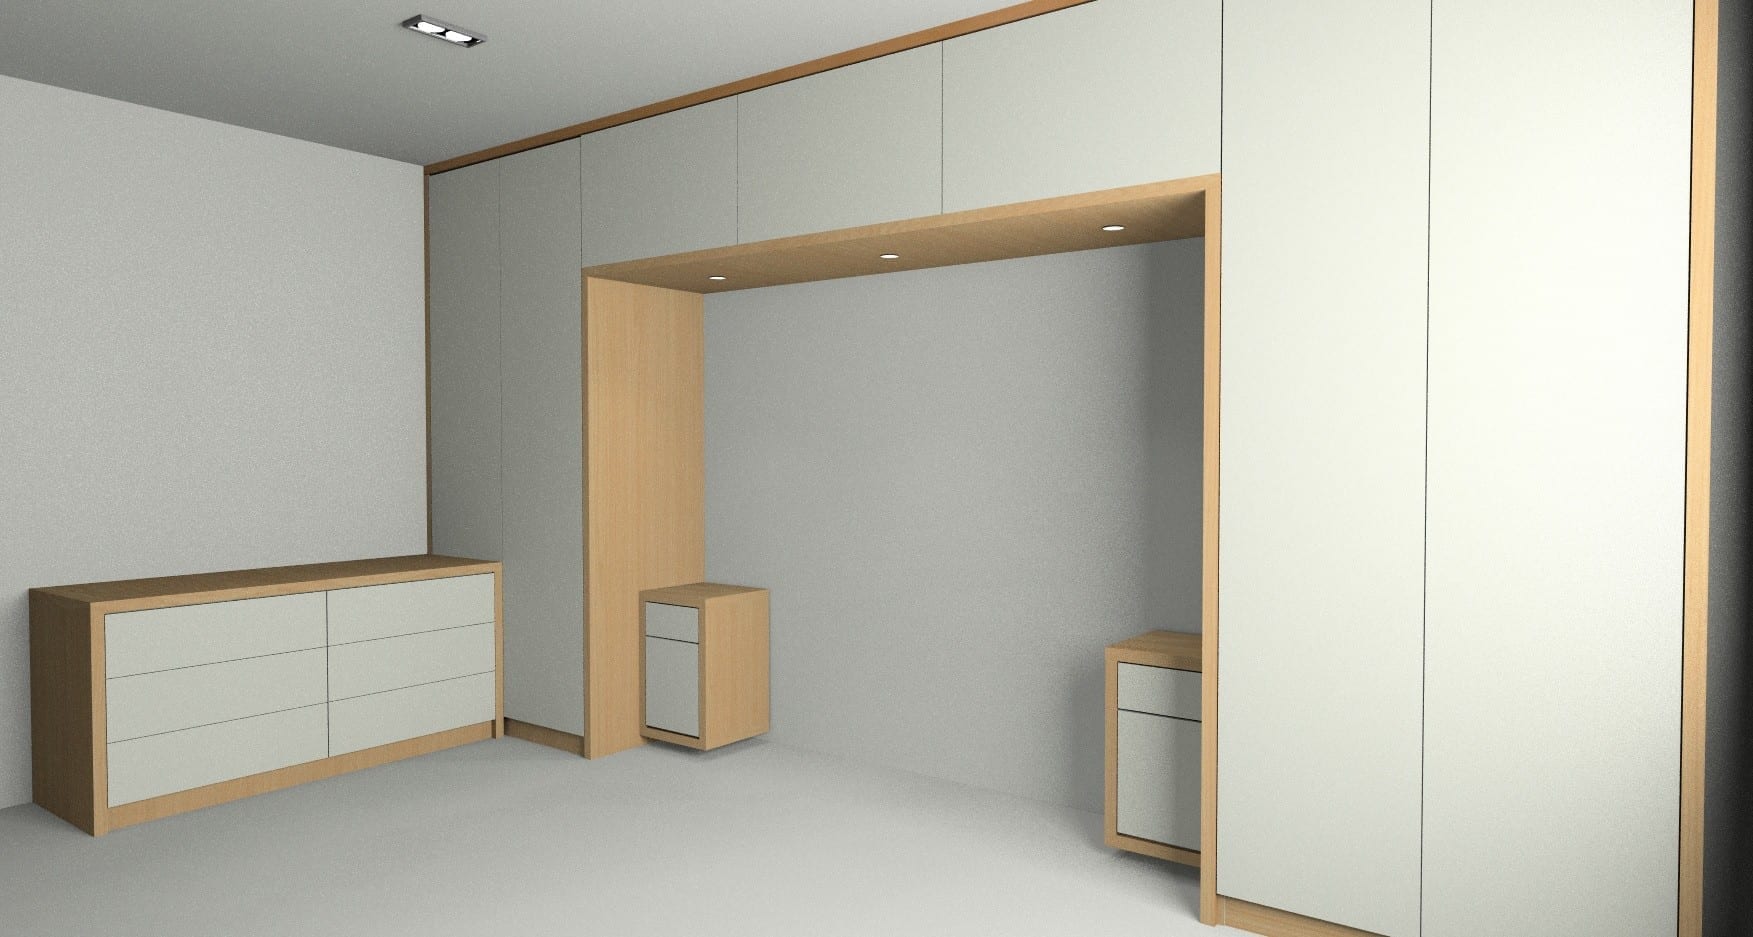 Rendered view of modern bedroom furniture designed for our customer form Silkstone South Yorkshire.